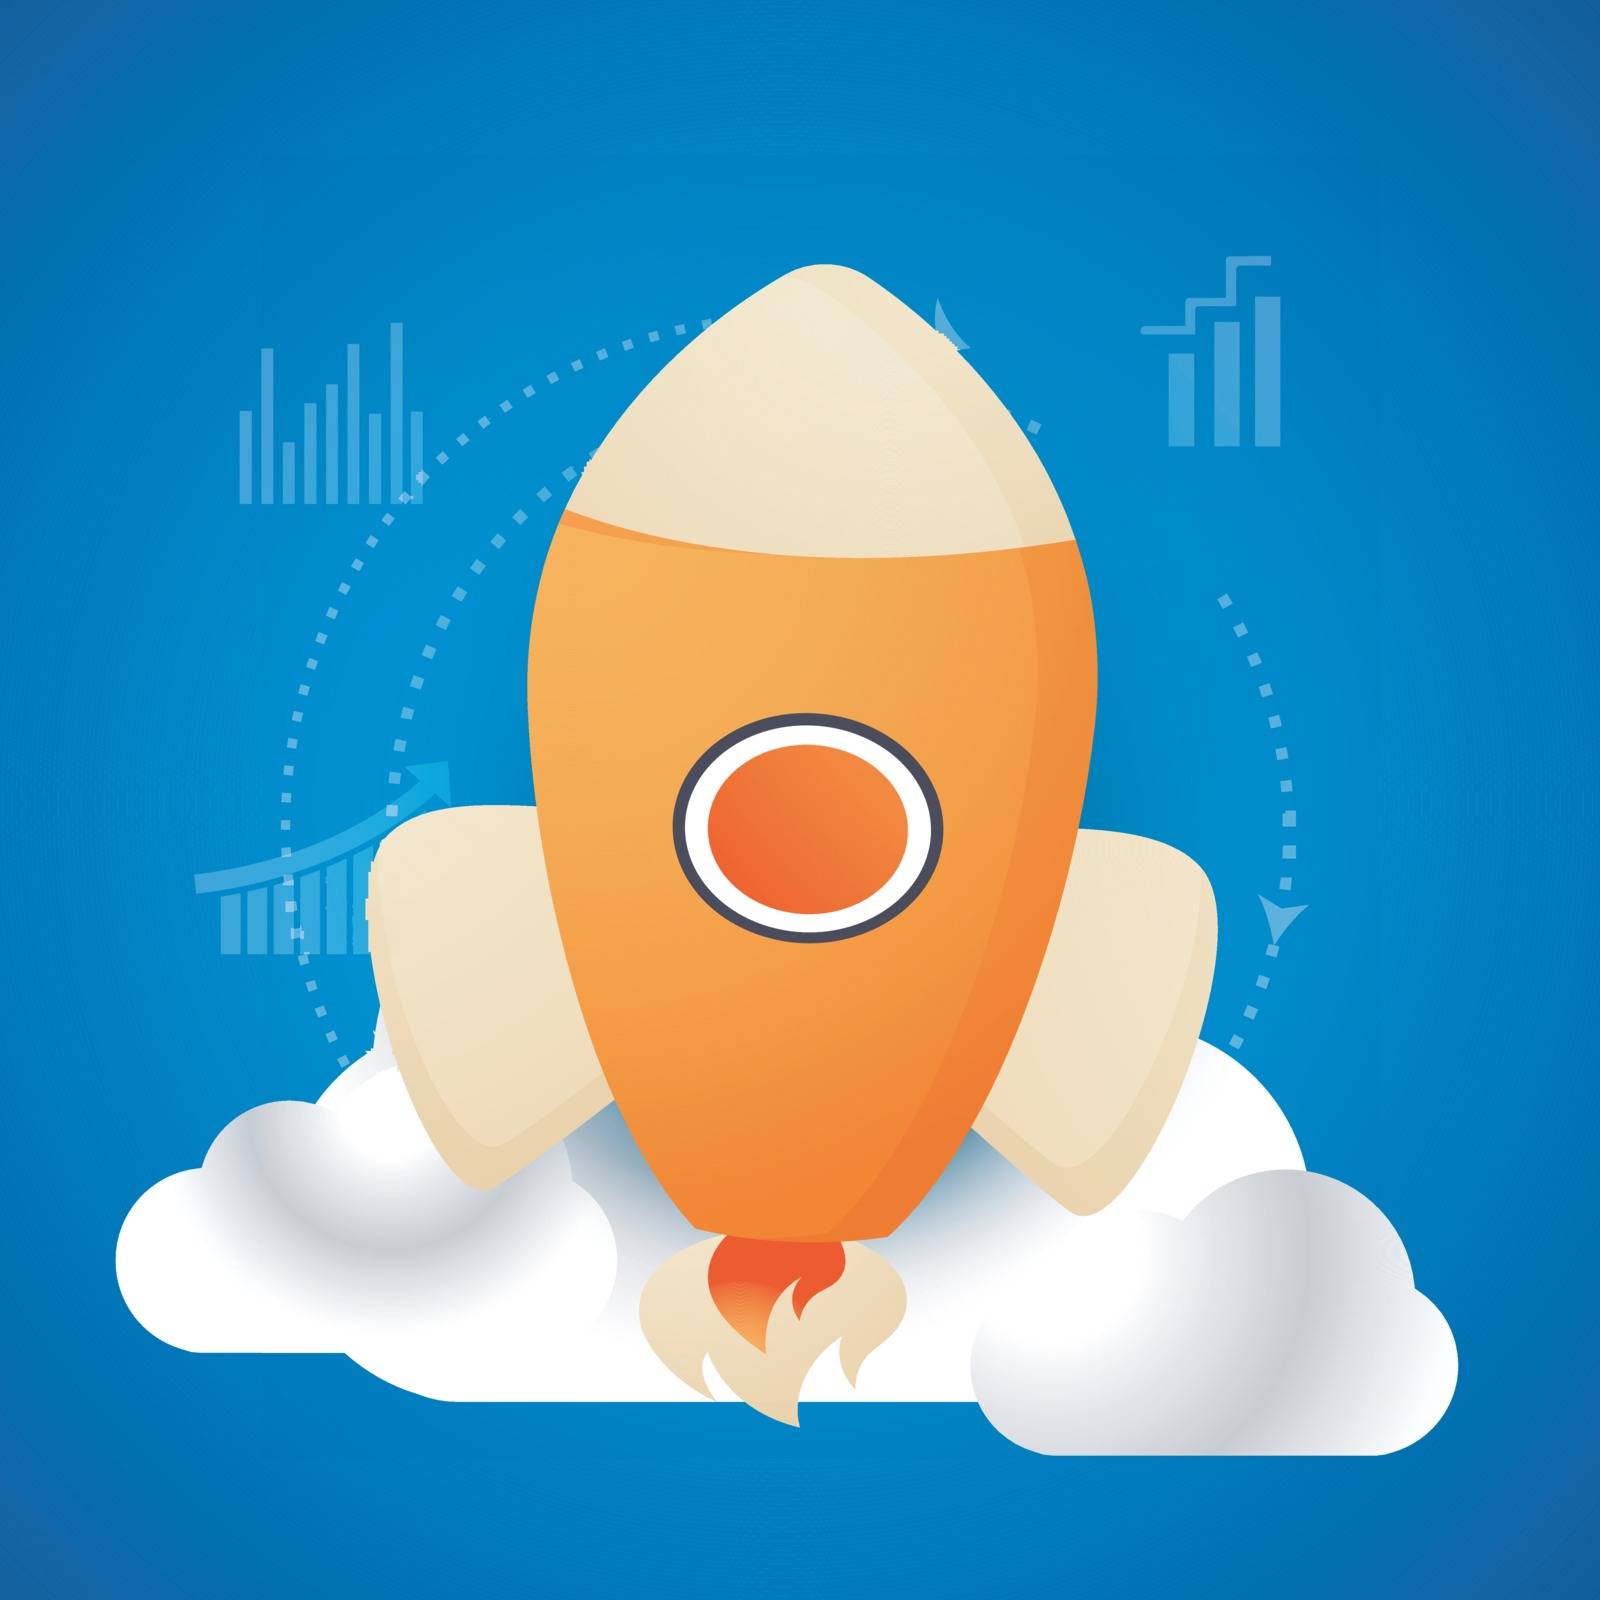 Launching Rocket on glossy clouds and infographic elements blue background for Business Start Up concept.